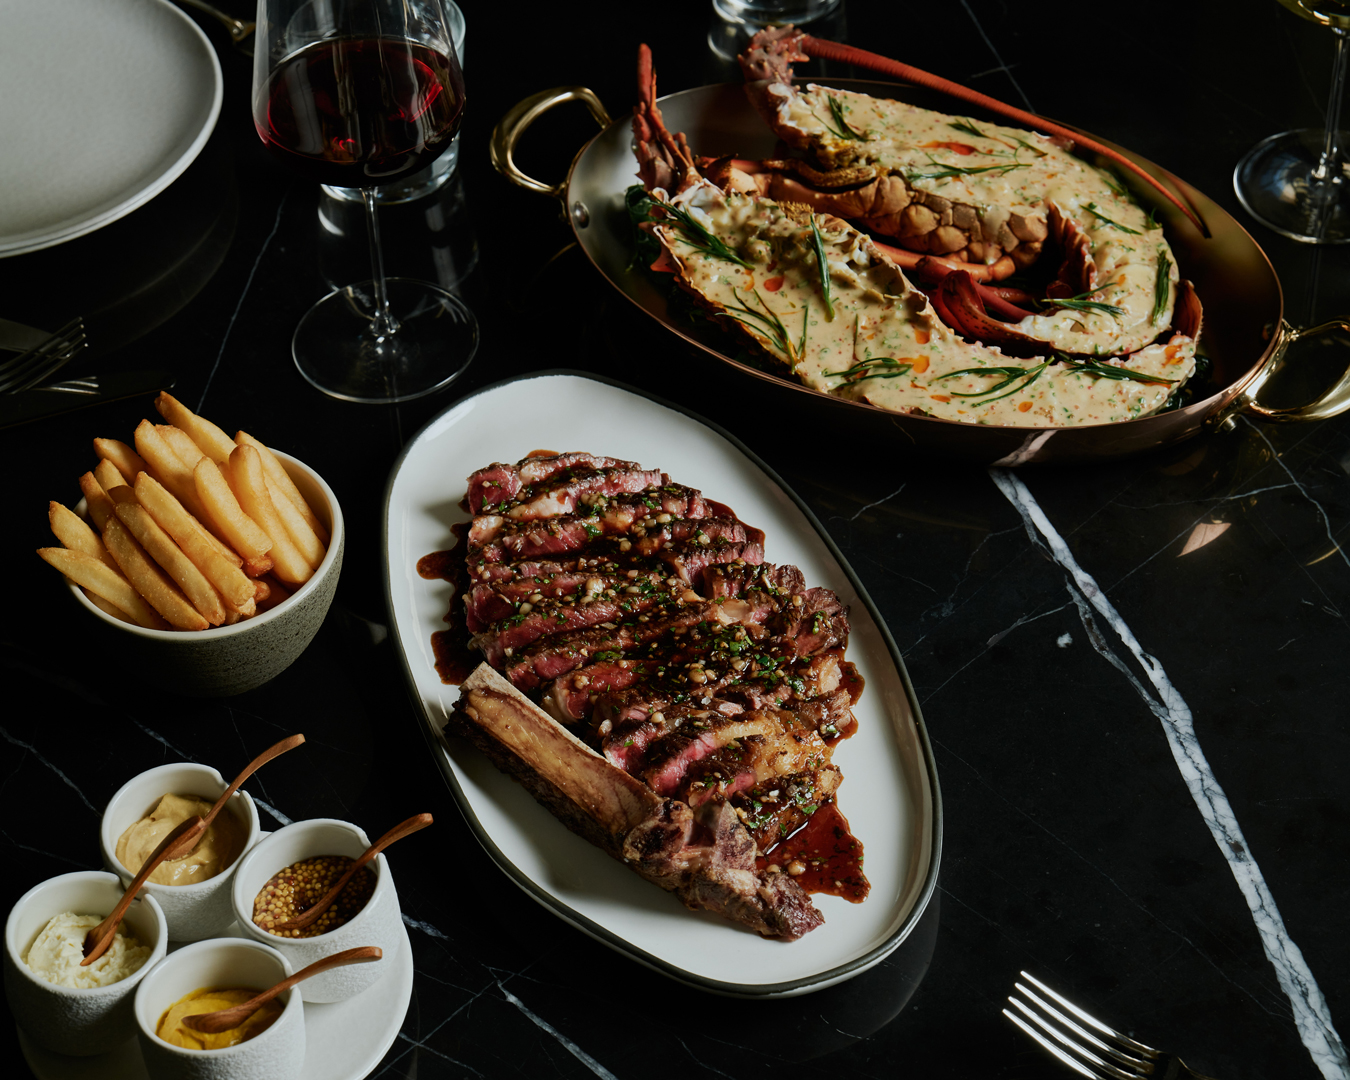 Dishes from Brasserie 1930 - a new restaurant in Sydney